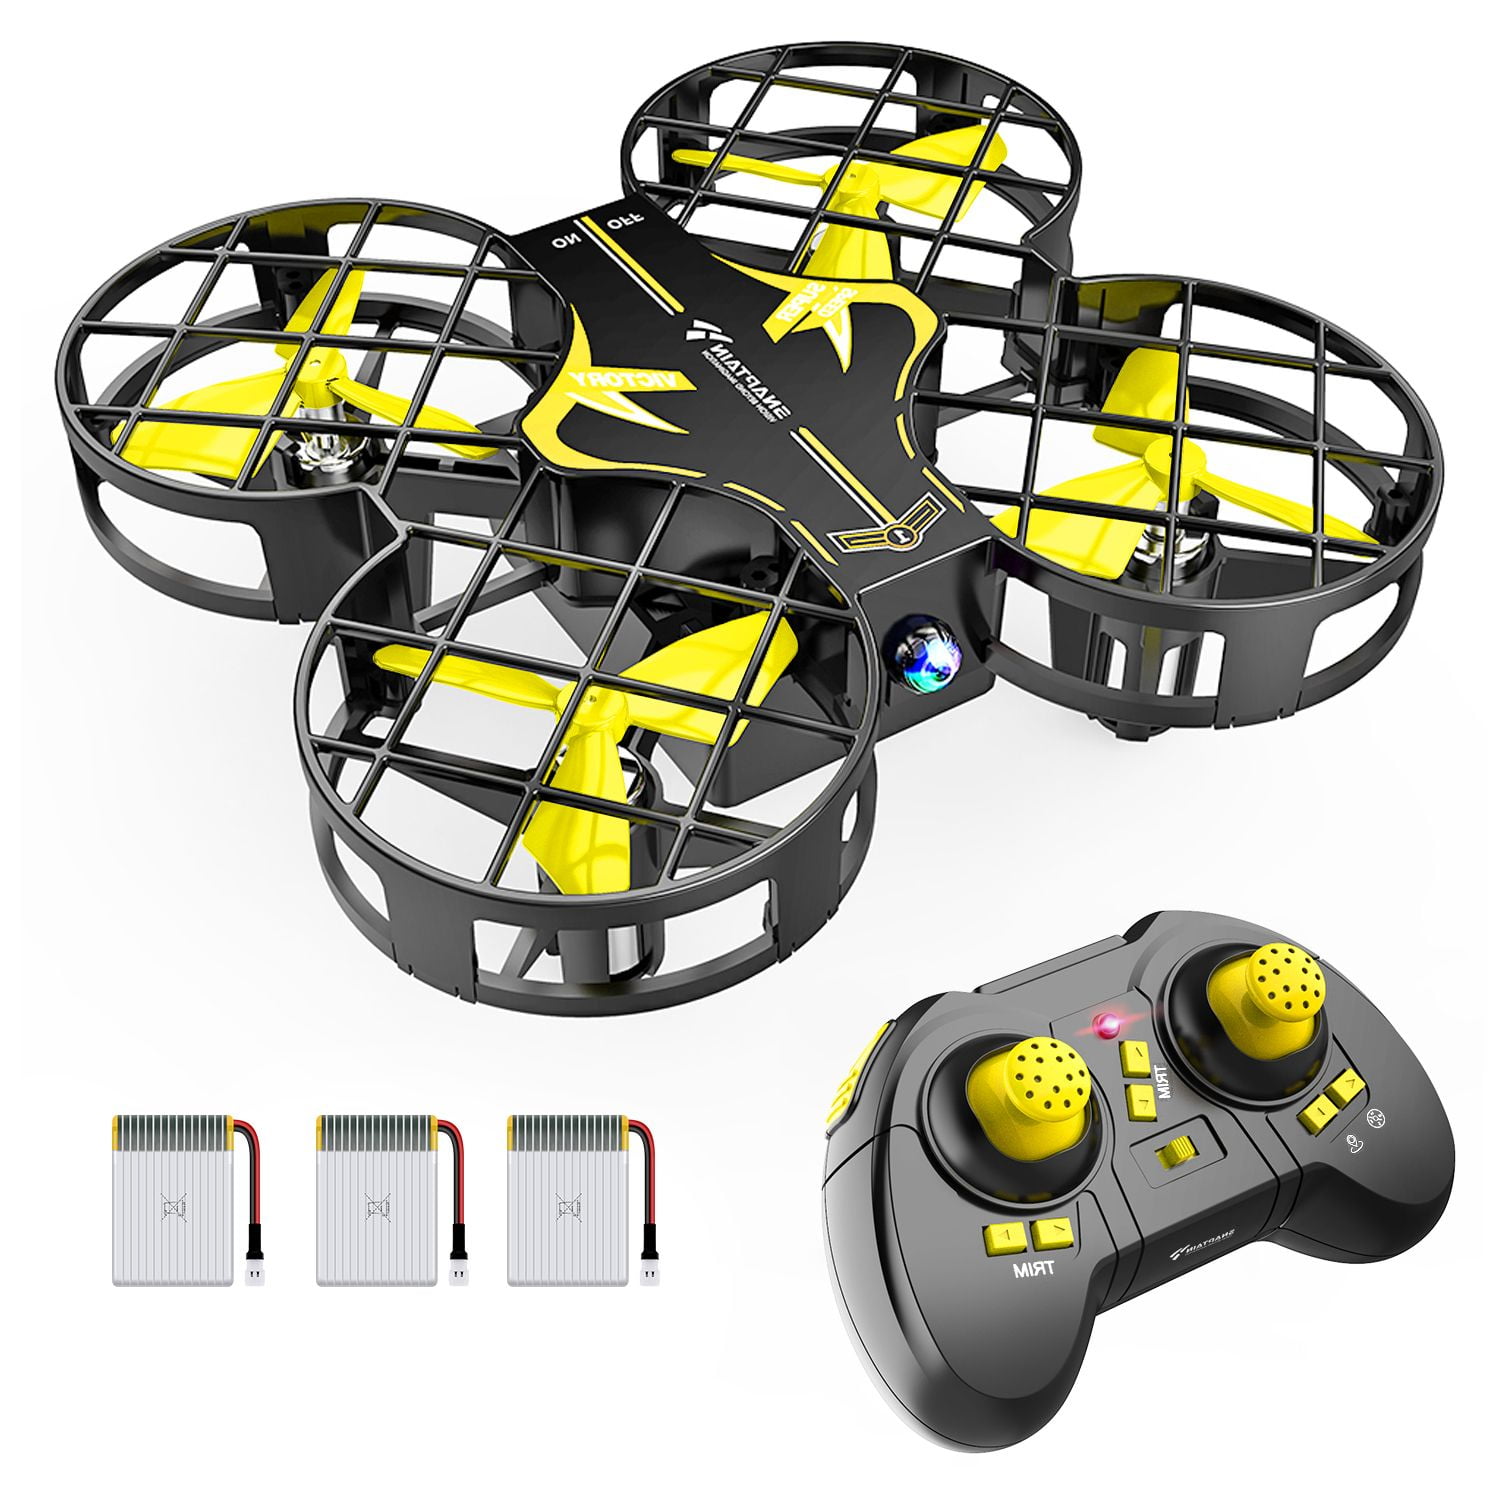 Altitude Hold One Key Take Off/Landing and Extra Batteries Toys for Boys and Girls KO-ON Drone for Kids and Beginners RC Helicopter Quadcopter with LED Lights 3D Flips Headless Mode 